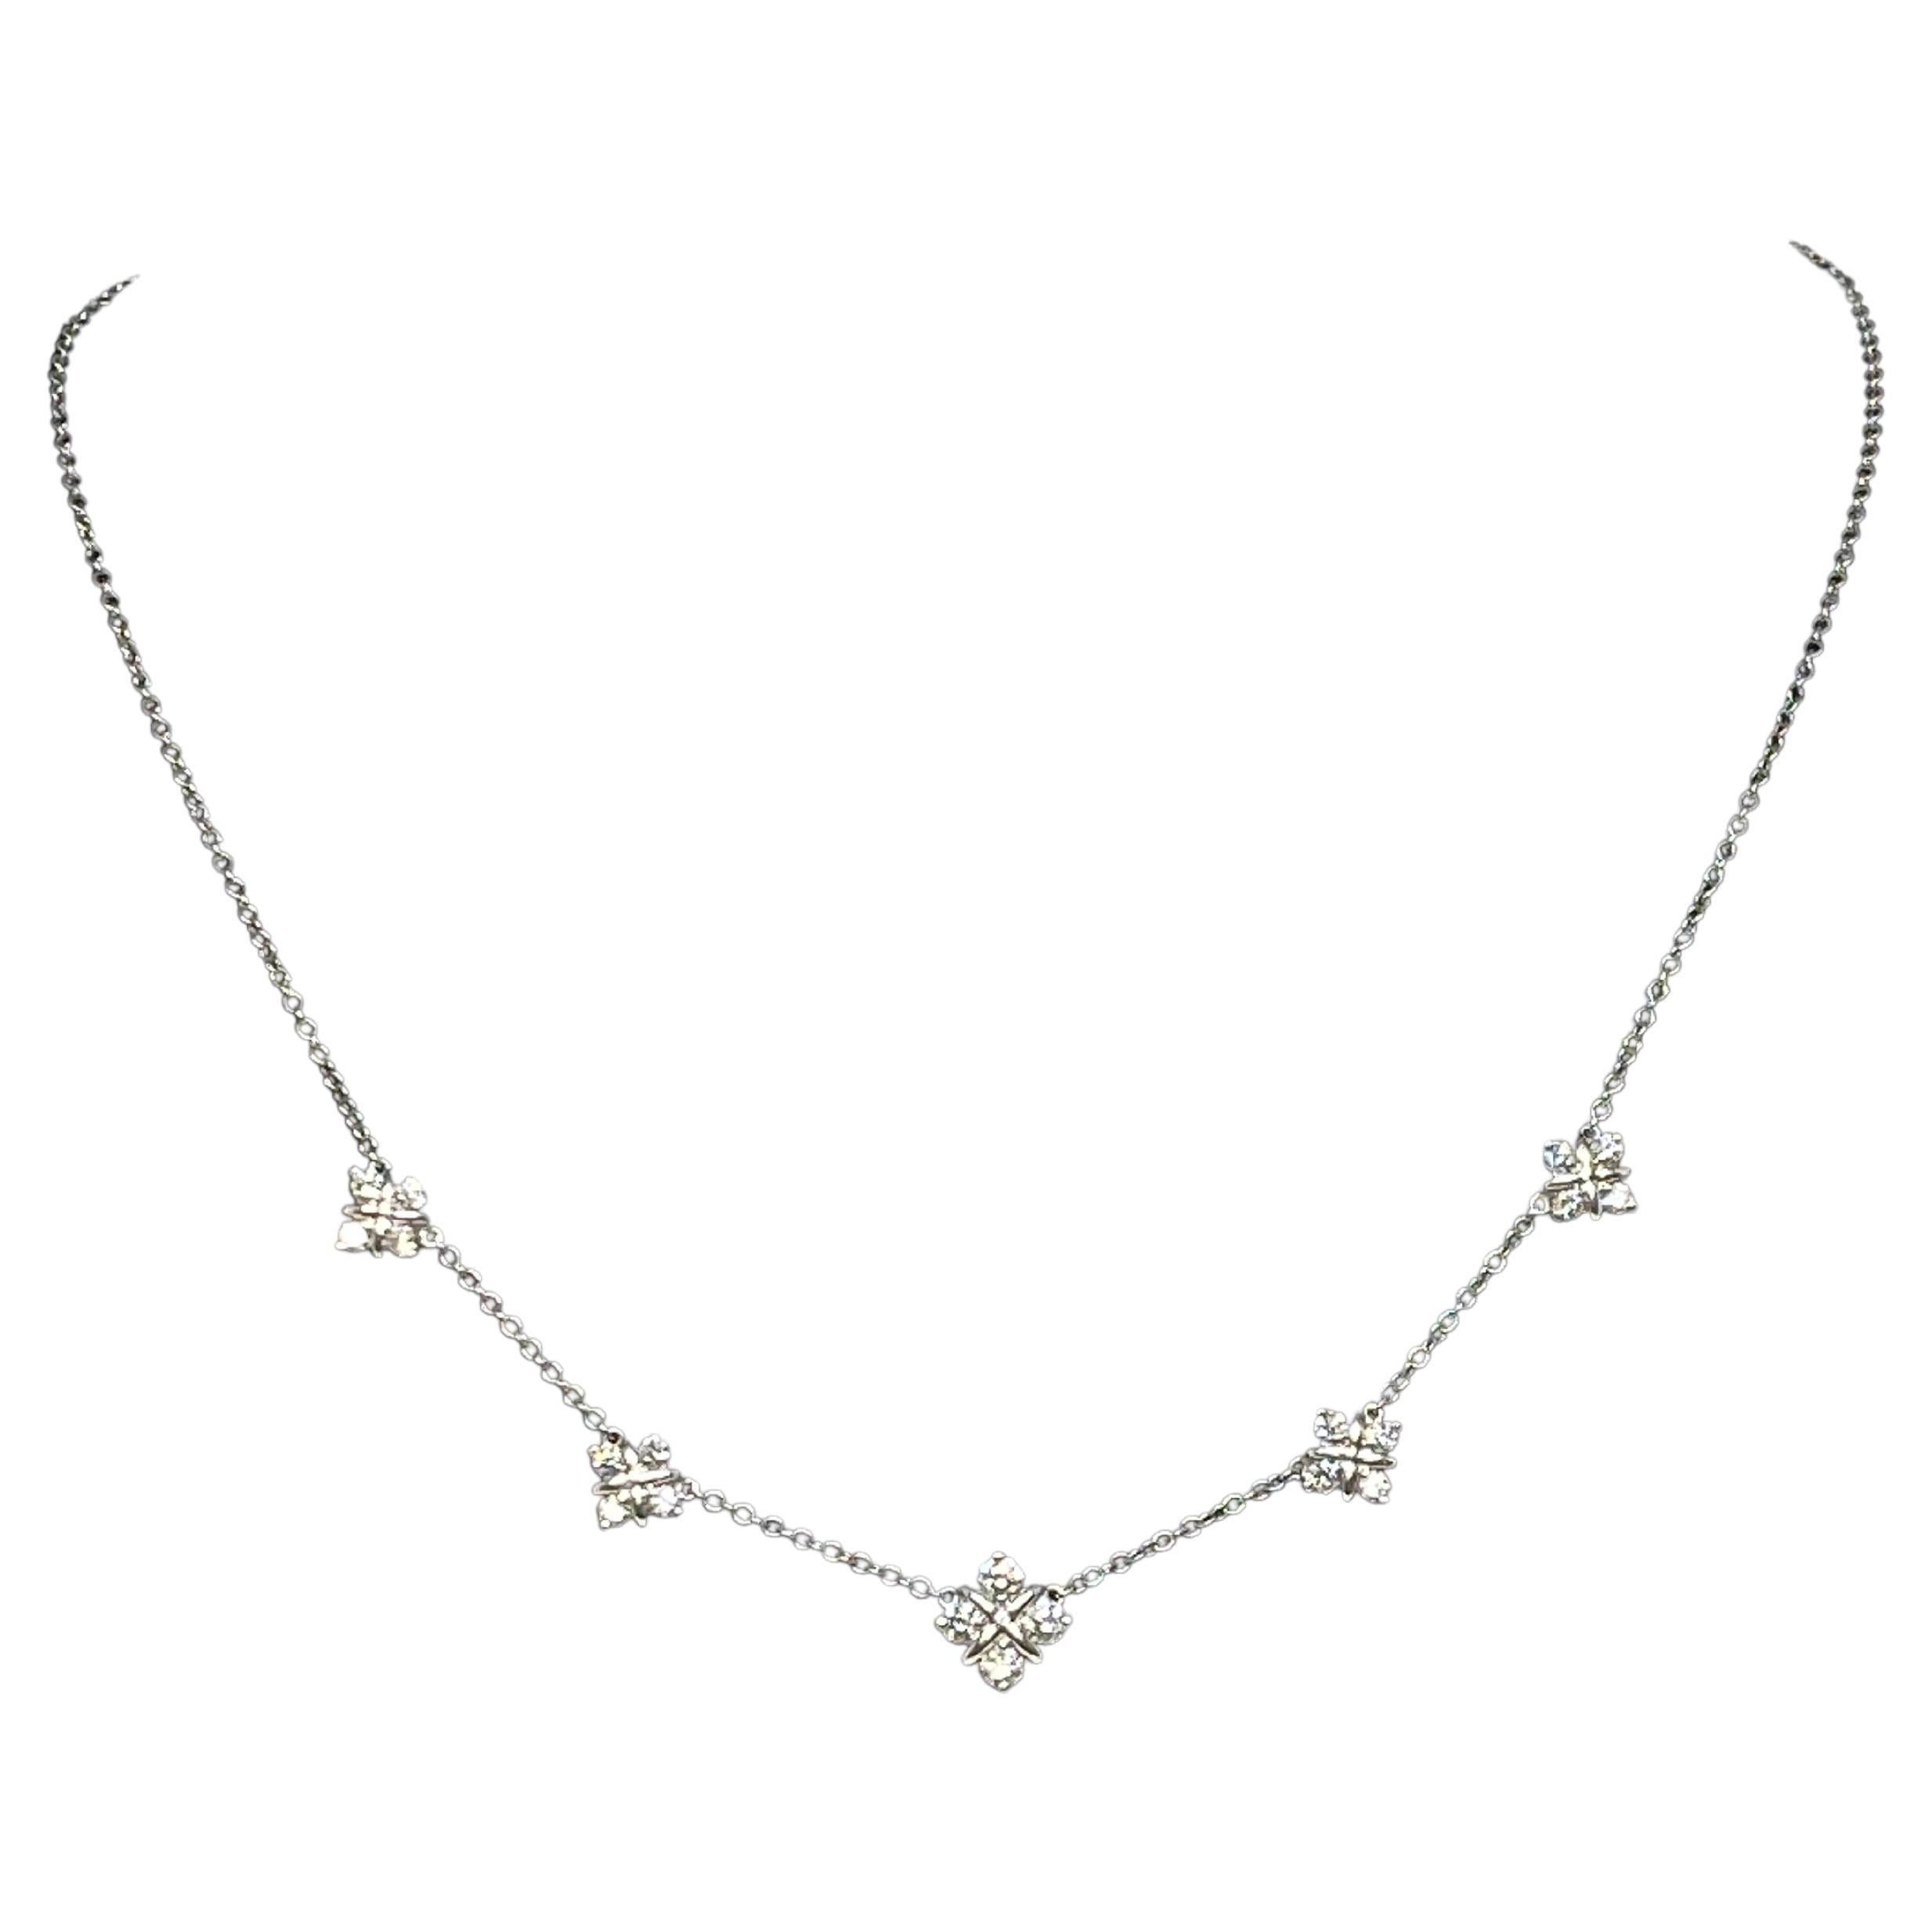 This beautiful diamond necklace is a timeless piece that epitomizes elegance and understated luxury.

This necklace features five sparkling stations of diamond  consisting of 4 diamonds per cluster. The main and middle cluster being the largest.